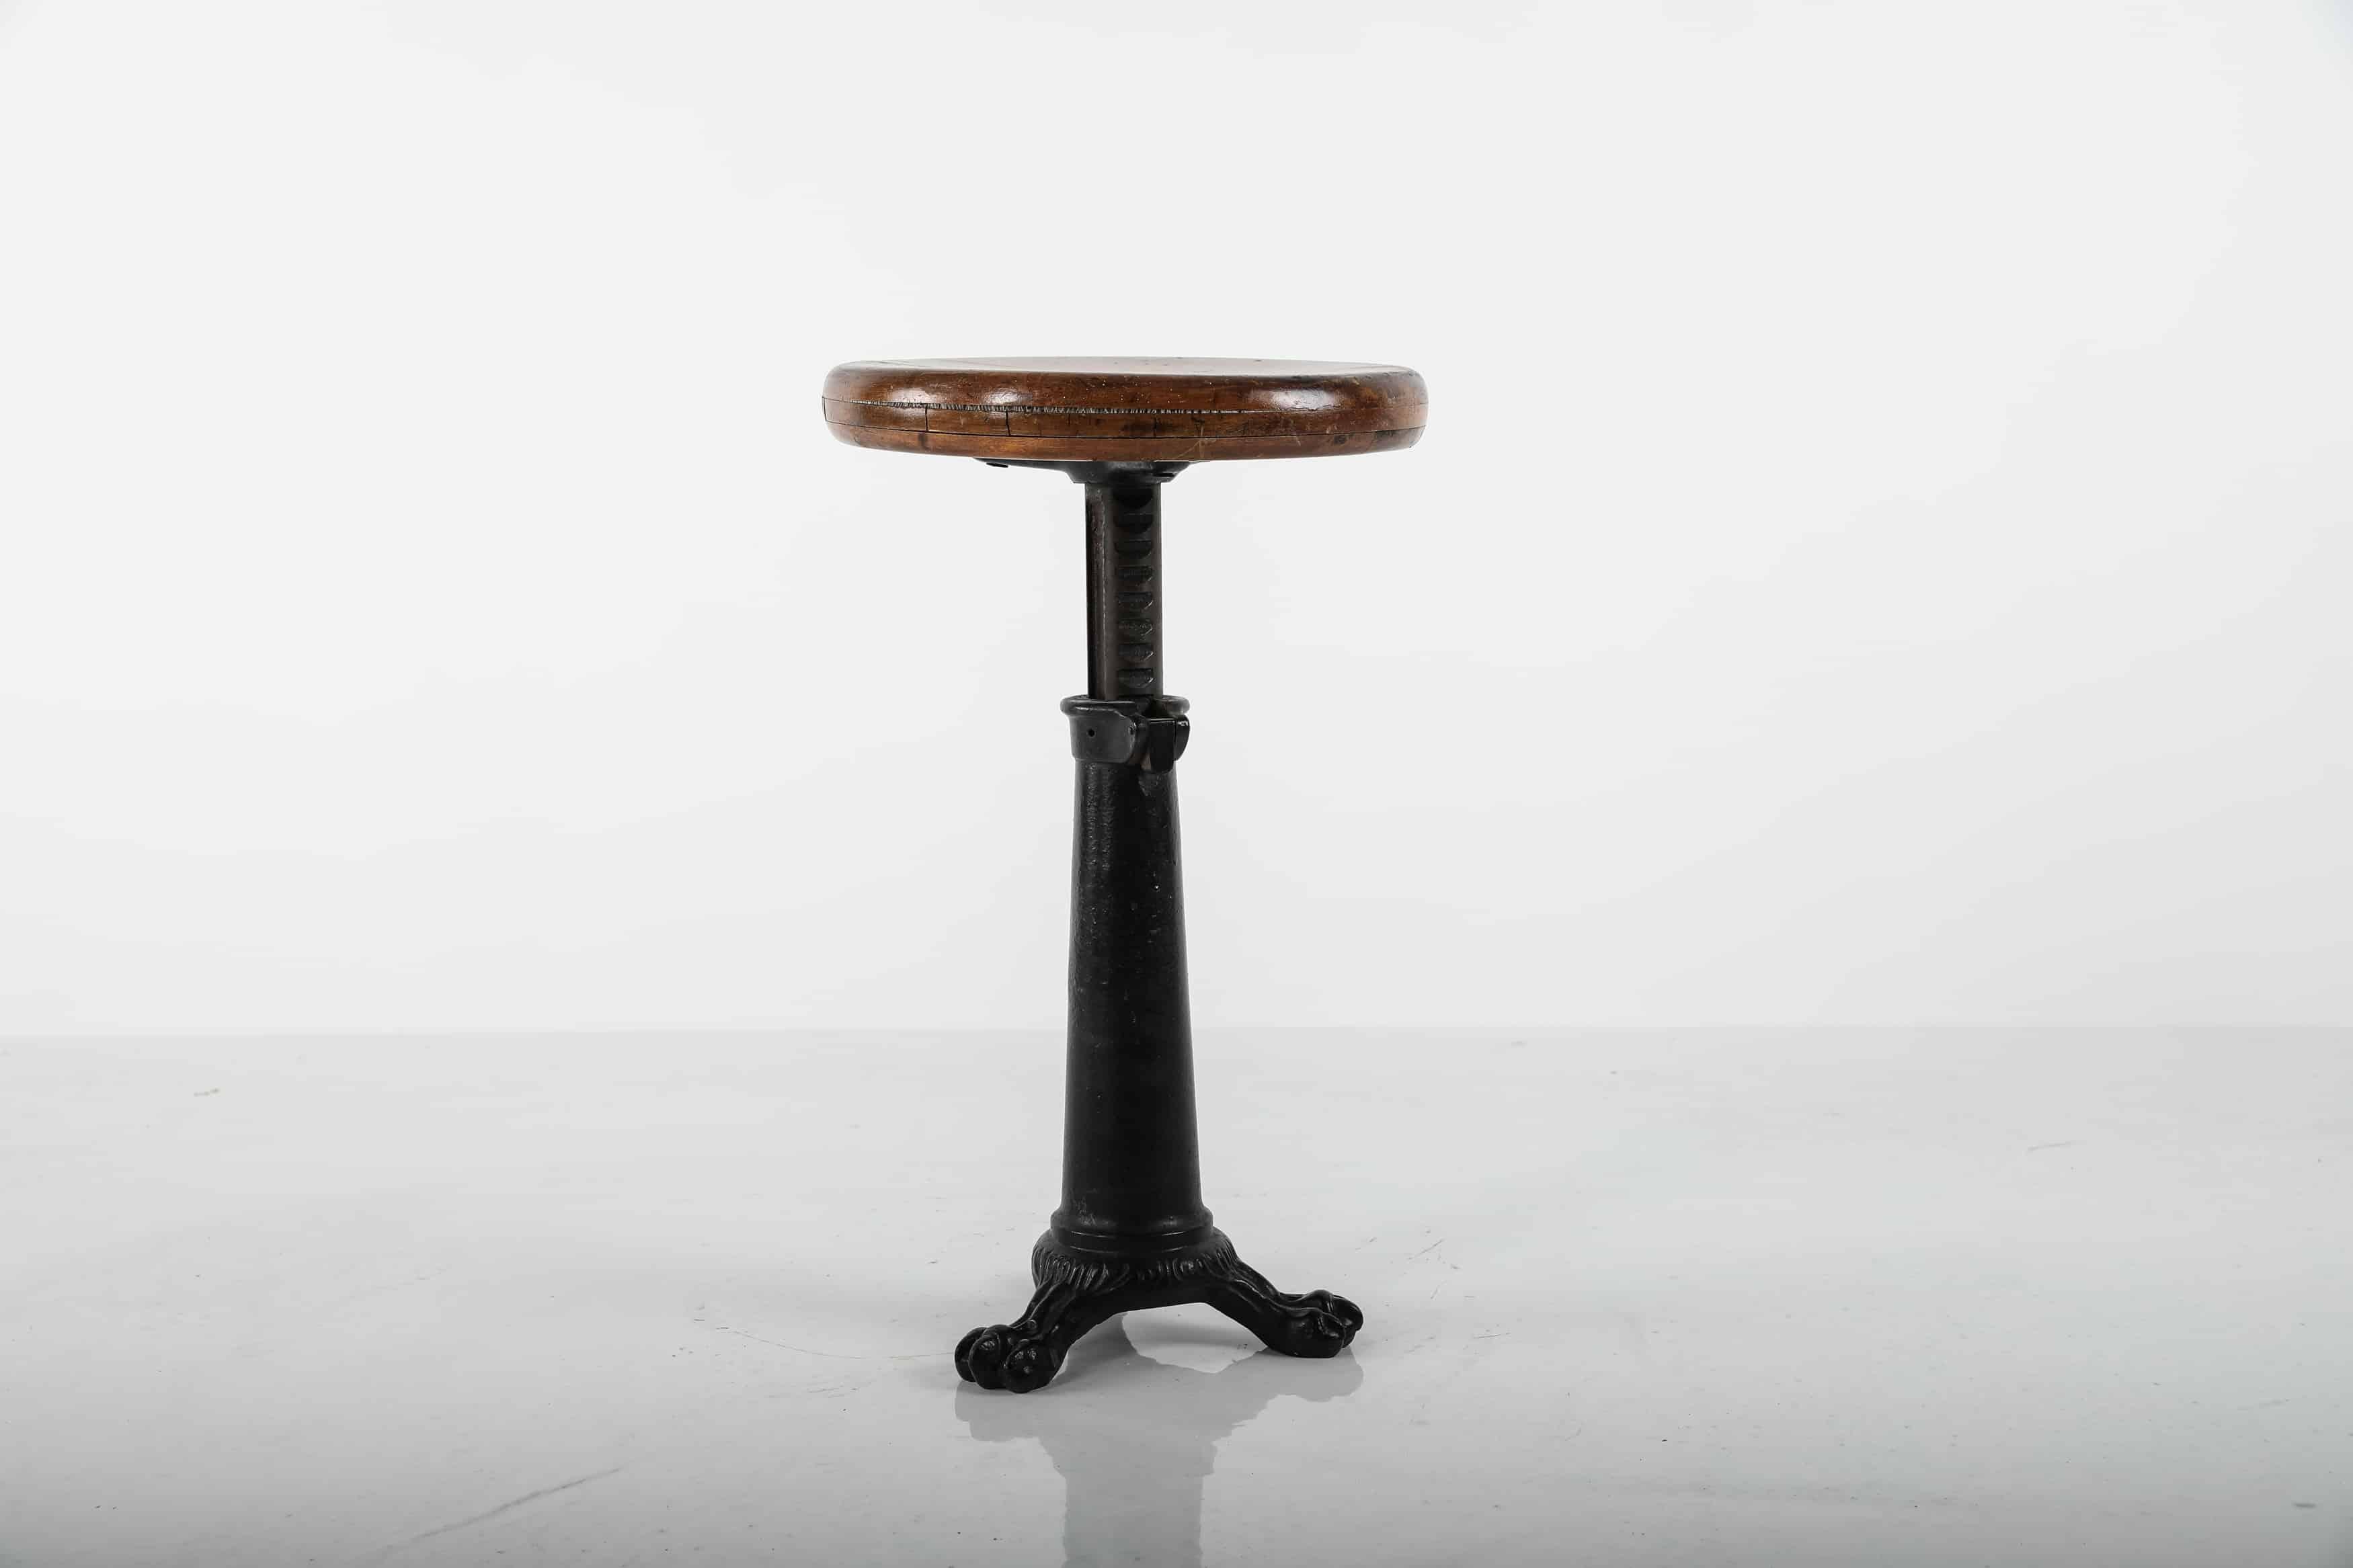 A very rare and early cast iron industrial machinist stools by Singer. c.1900

The earliest known variant of the iconic Singer stool manufactured by the Simanco Company, the cast base has been left as found, just cleaned and polished. Pre-drilled